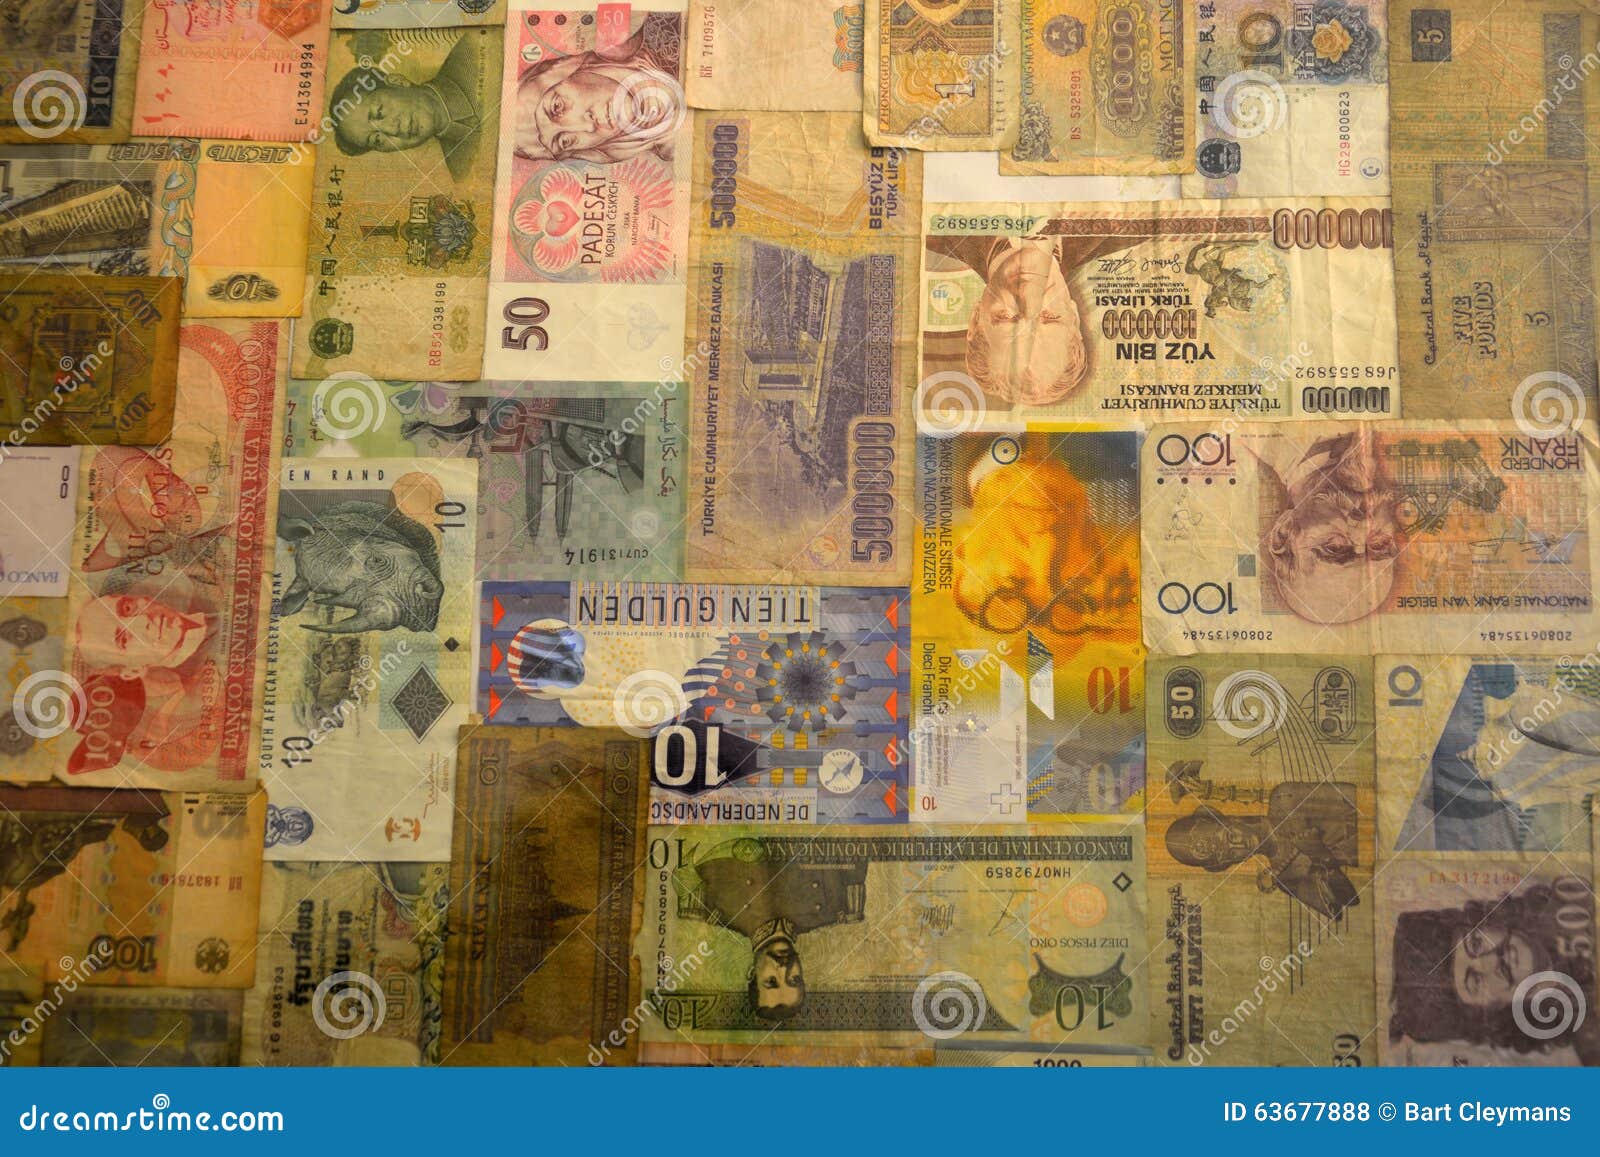 Old European Currency 40